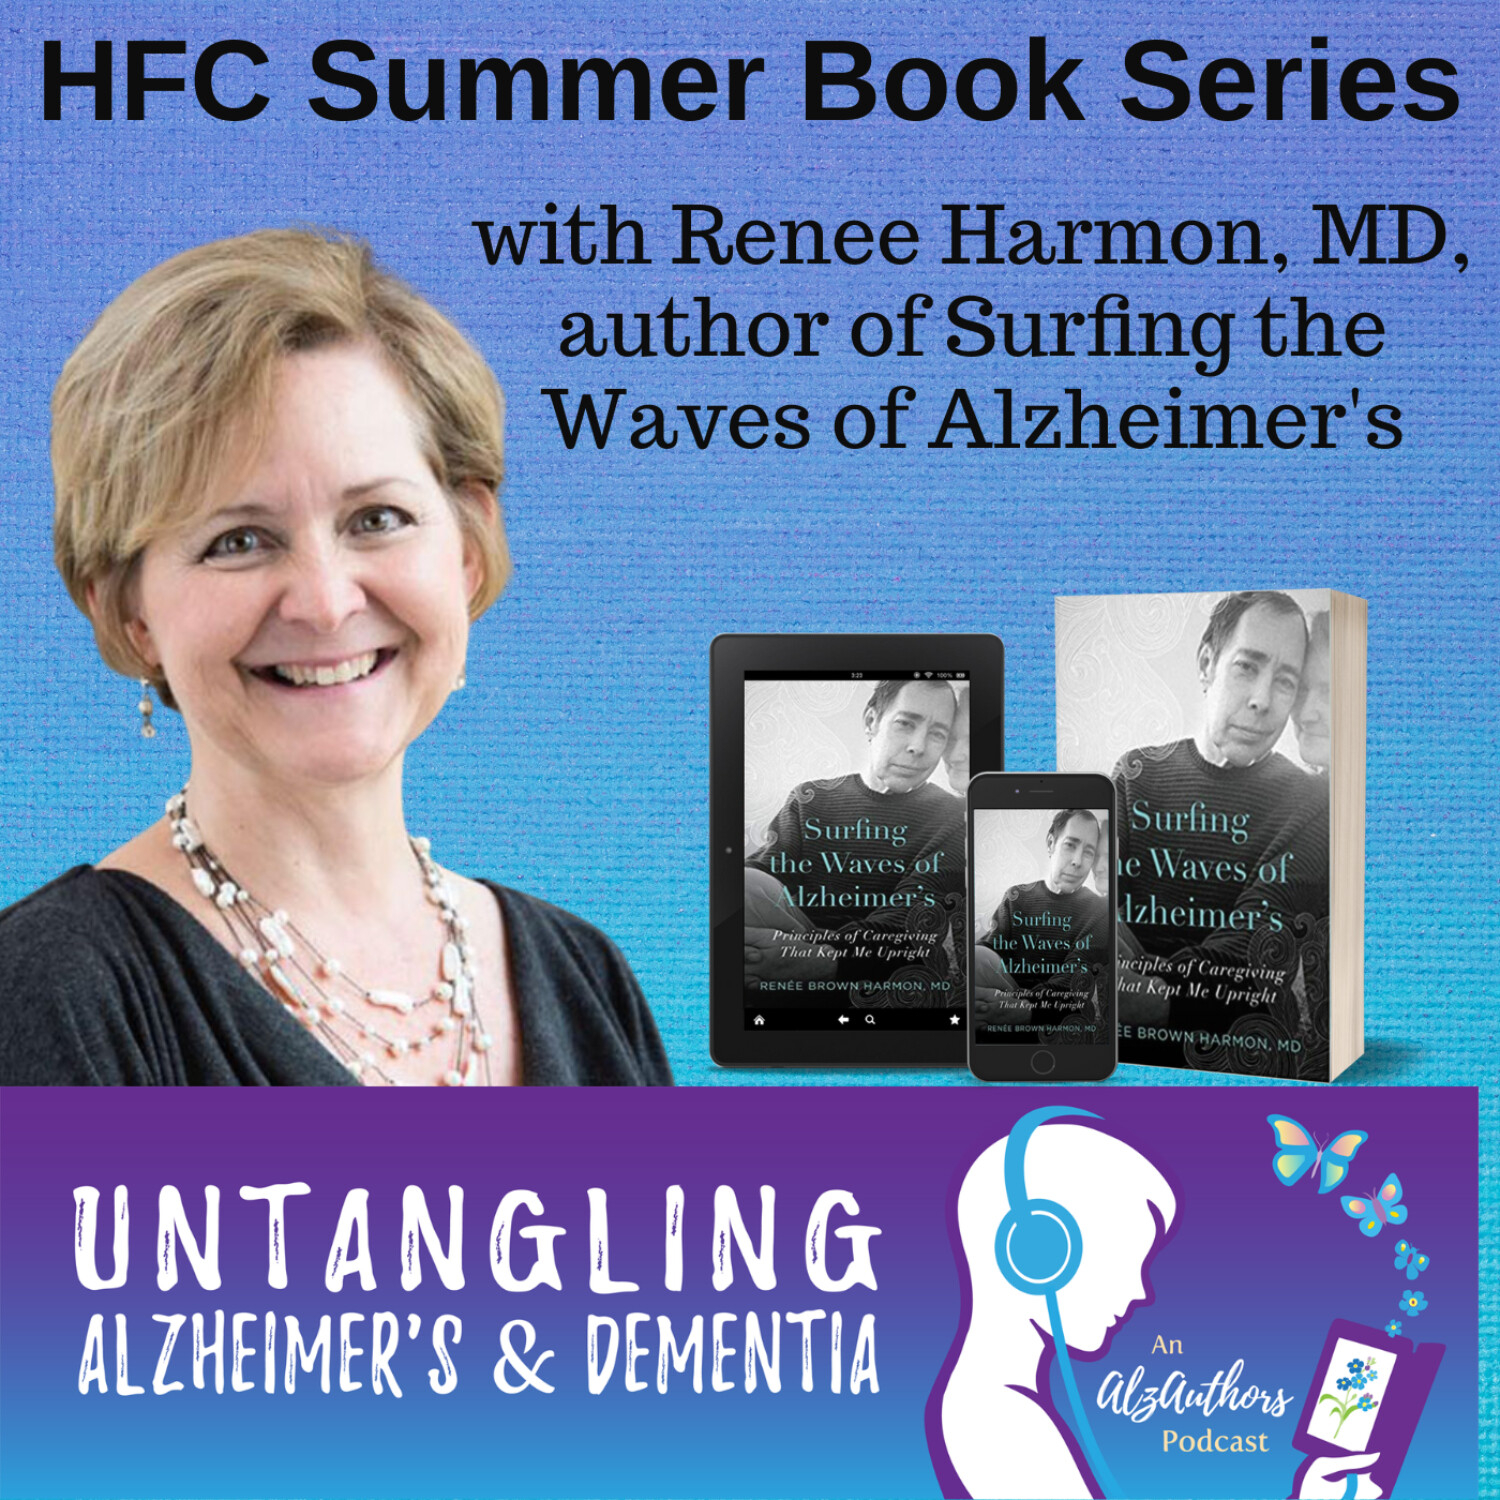 Surfing the Waves of Alzheimer’s with Renee Harmon, MD